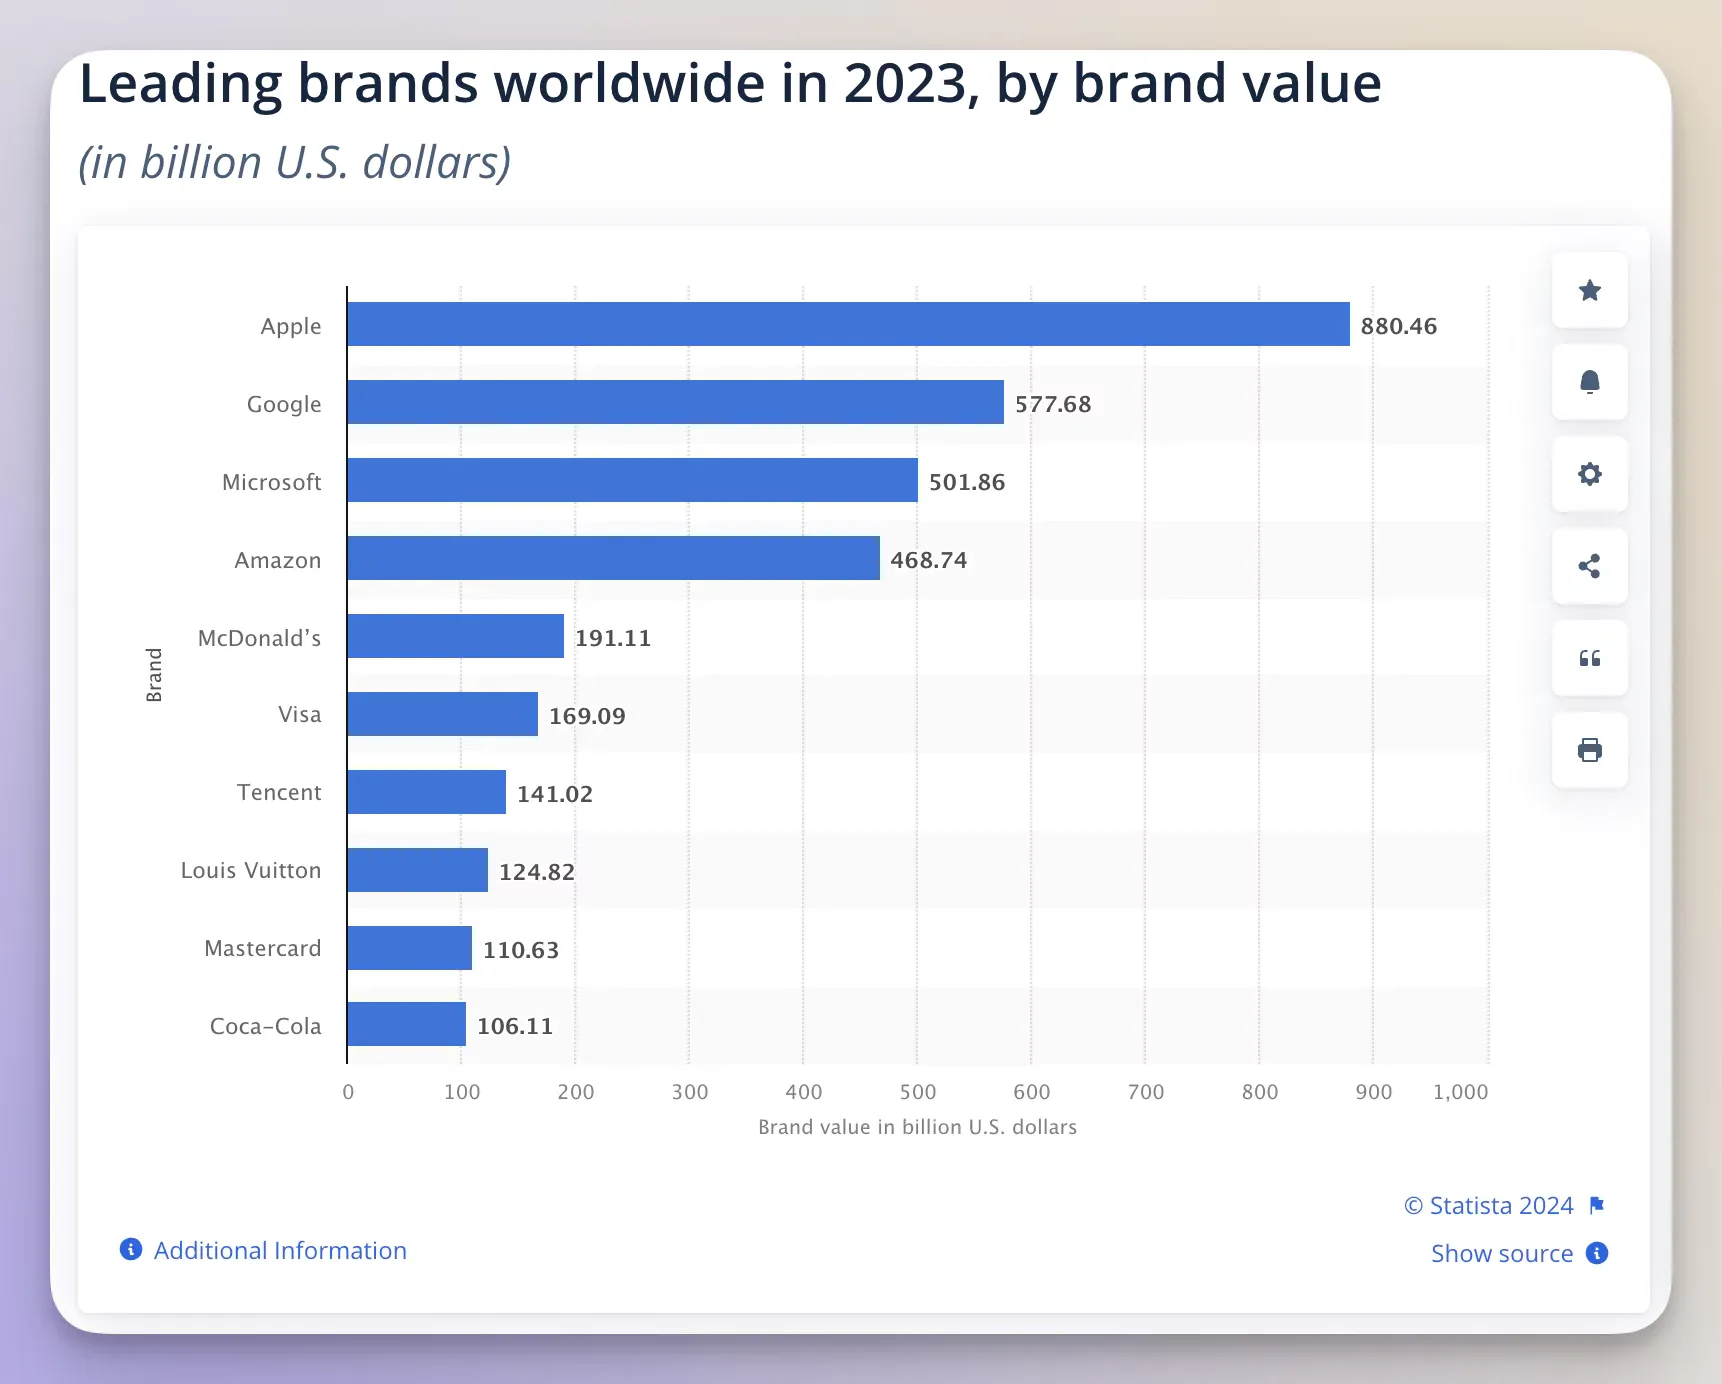 Leading brands worldwide in 2023, by brand value